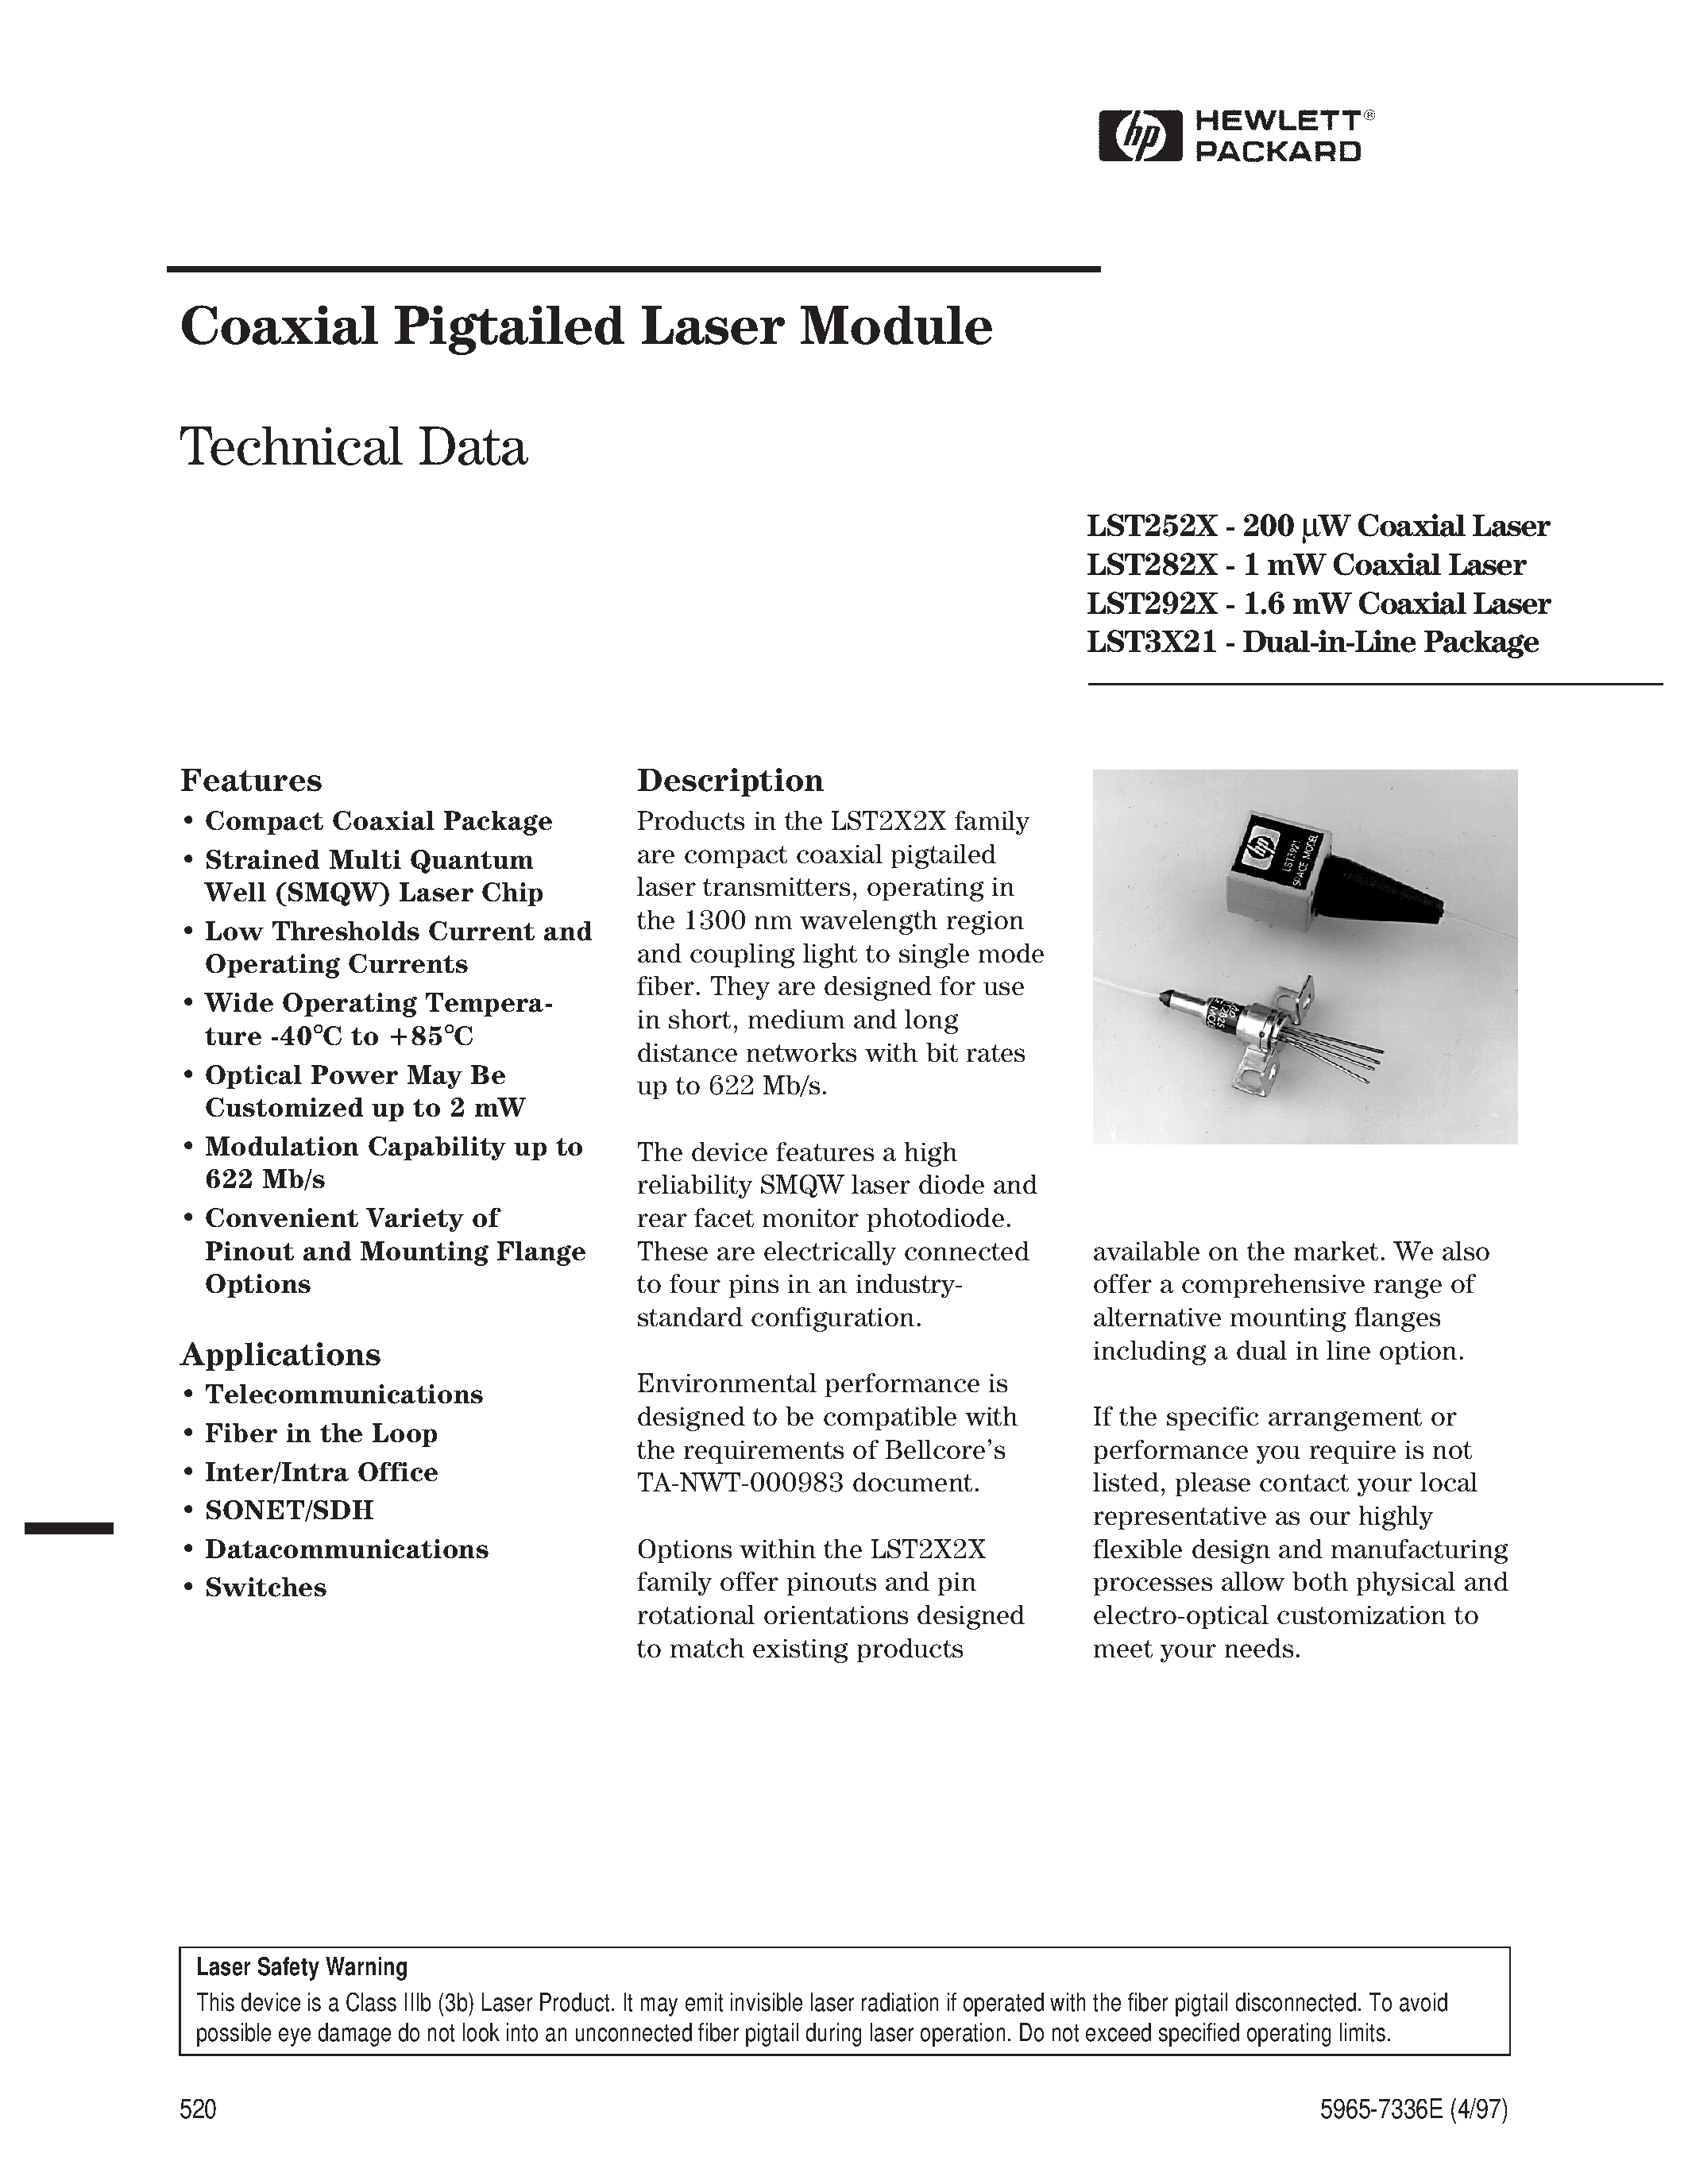 Даташит LST2925-S4-B-ST - Coaxial Pigtailed Laser Module страница 1